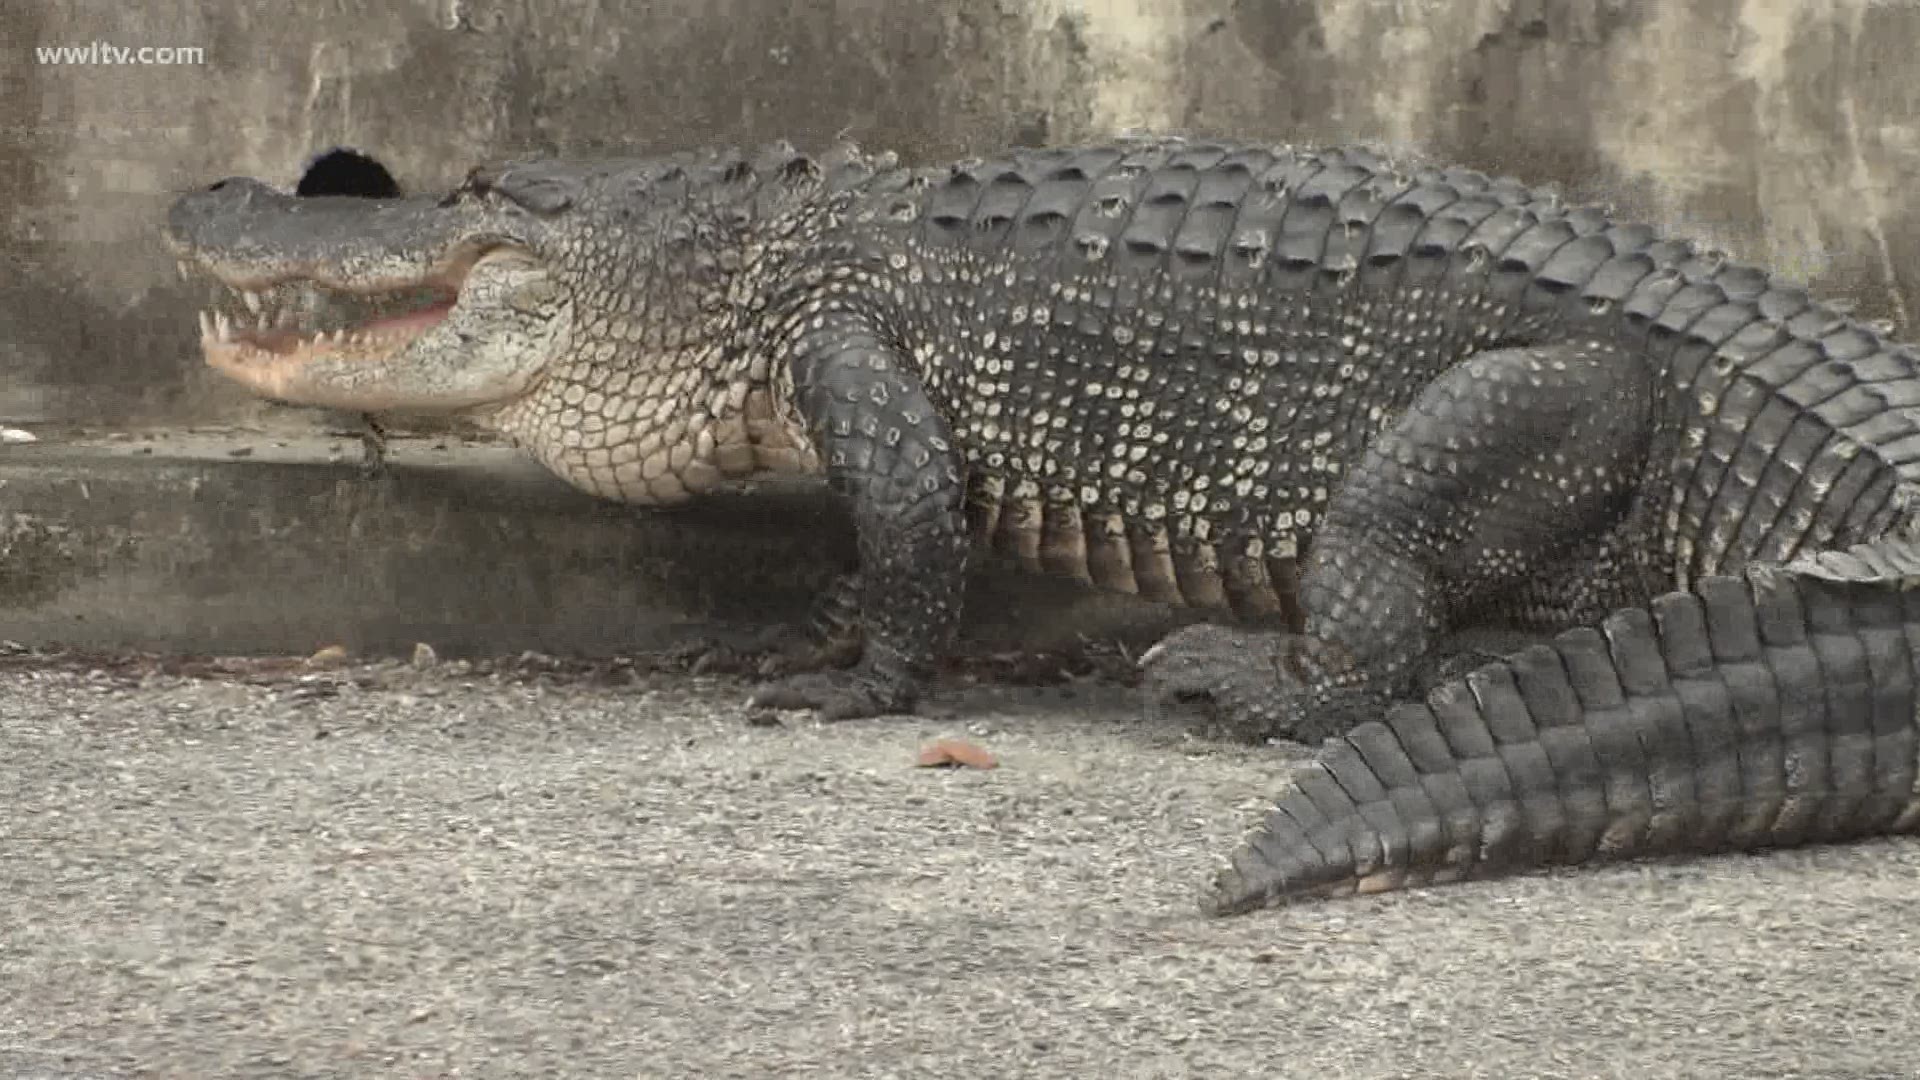 A large alligator found walking on the street in Lakeview was killed Friday morning because it was reportedly too big to relocate.